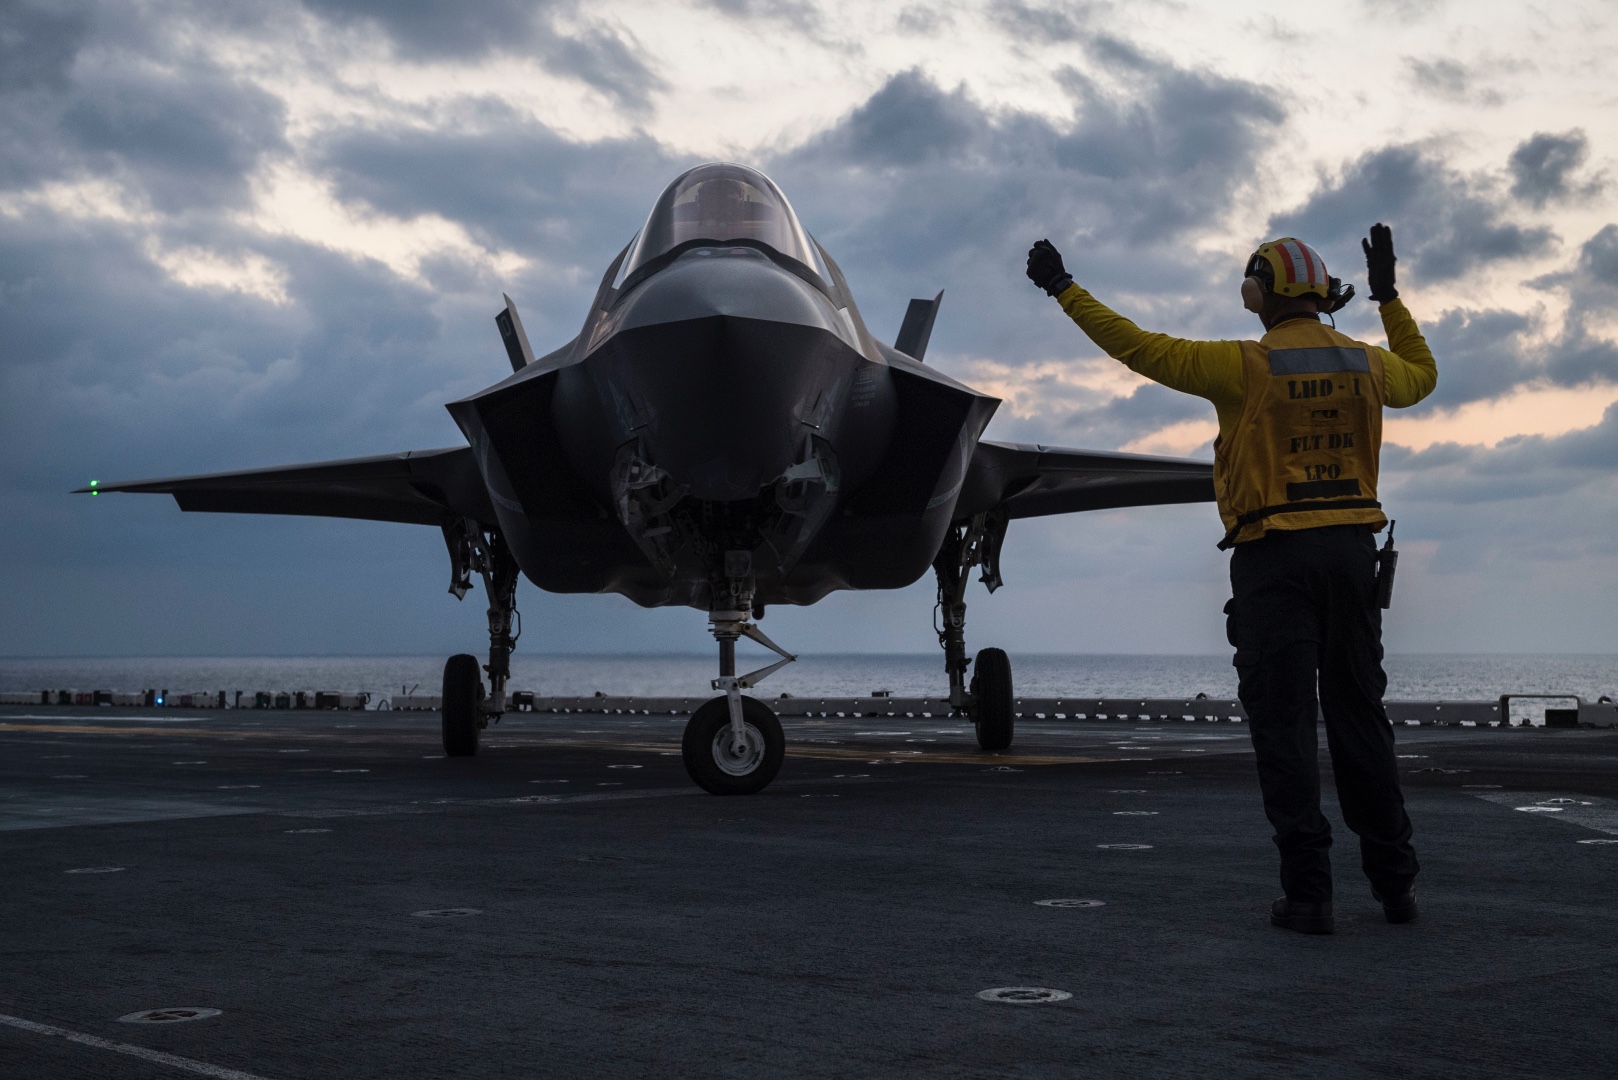 Aviation Boatswain's Mate (Handling) 1st Class James Spencer directs an F-35B Lightning II aircraft belonging to Marine Fighter Attack Squadron 121, the fixed wing component of 31st Marine Expeditionary Unit's (MEU) Aviation Combat Element, on the flight deck of the amphibious assault ship USS Wasp